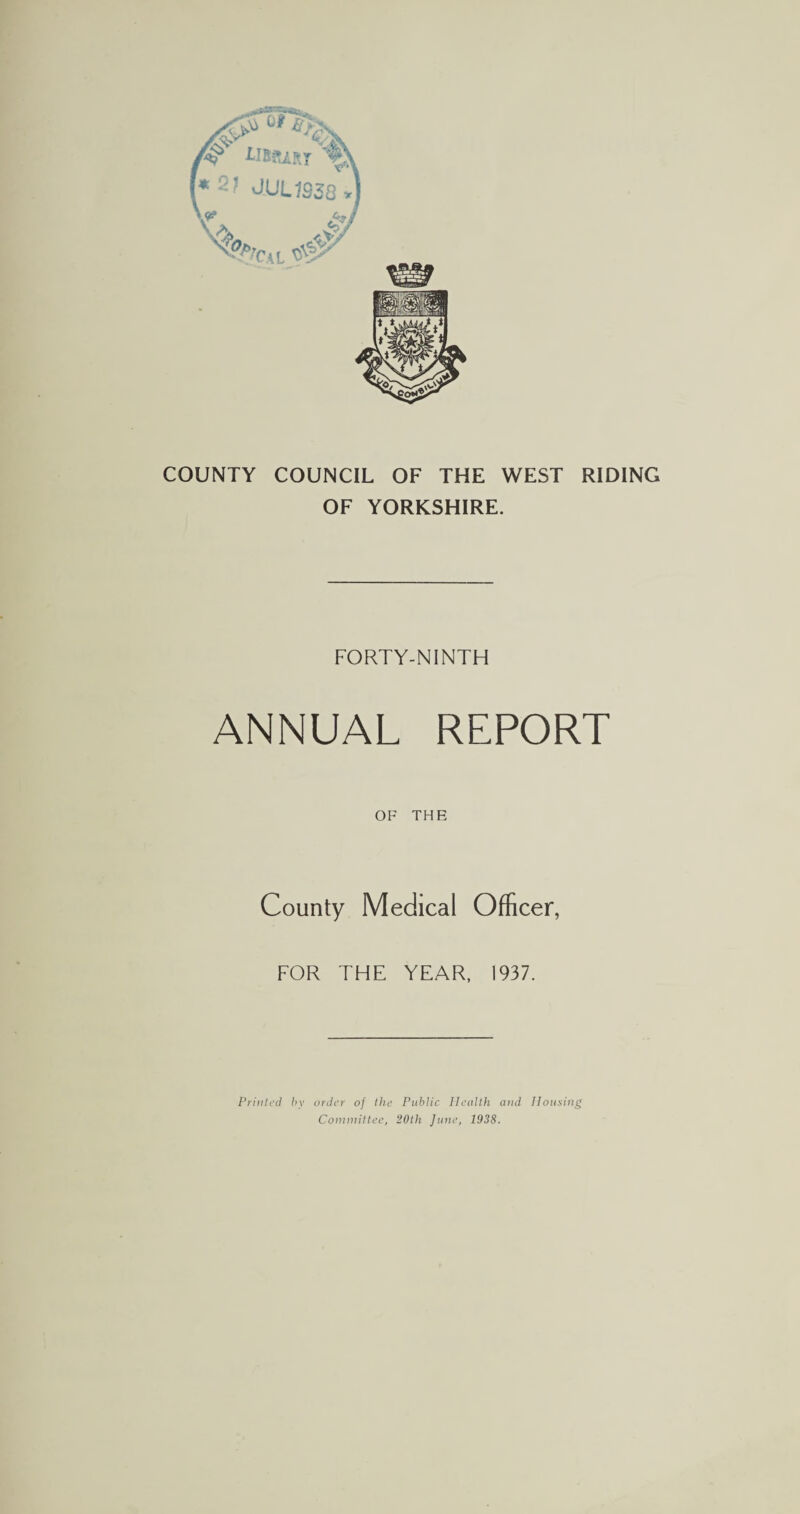 COUNTY COUNCIL OF THE WEST RIDING OF YORKSHIRE. FORTY-NINTH ANNUAL REPORT OF THE County Medical Officer, FOR THE YEAR, 1937. Printed by order of the Public Health and Housing Committee, 20th June, 1938.